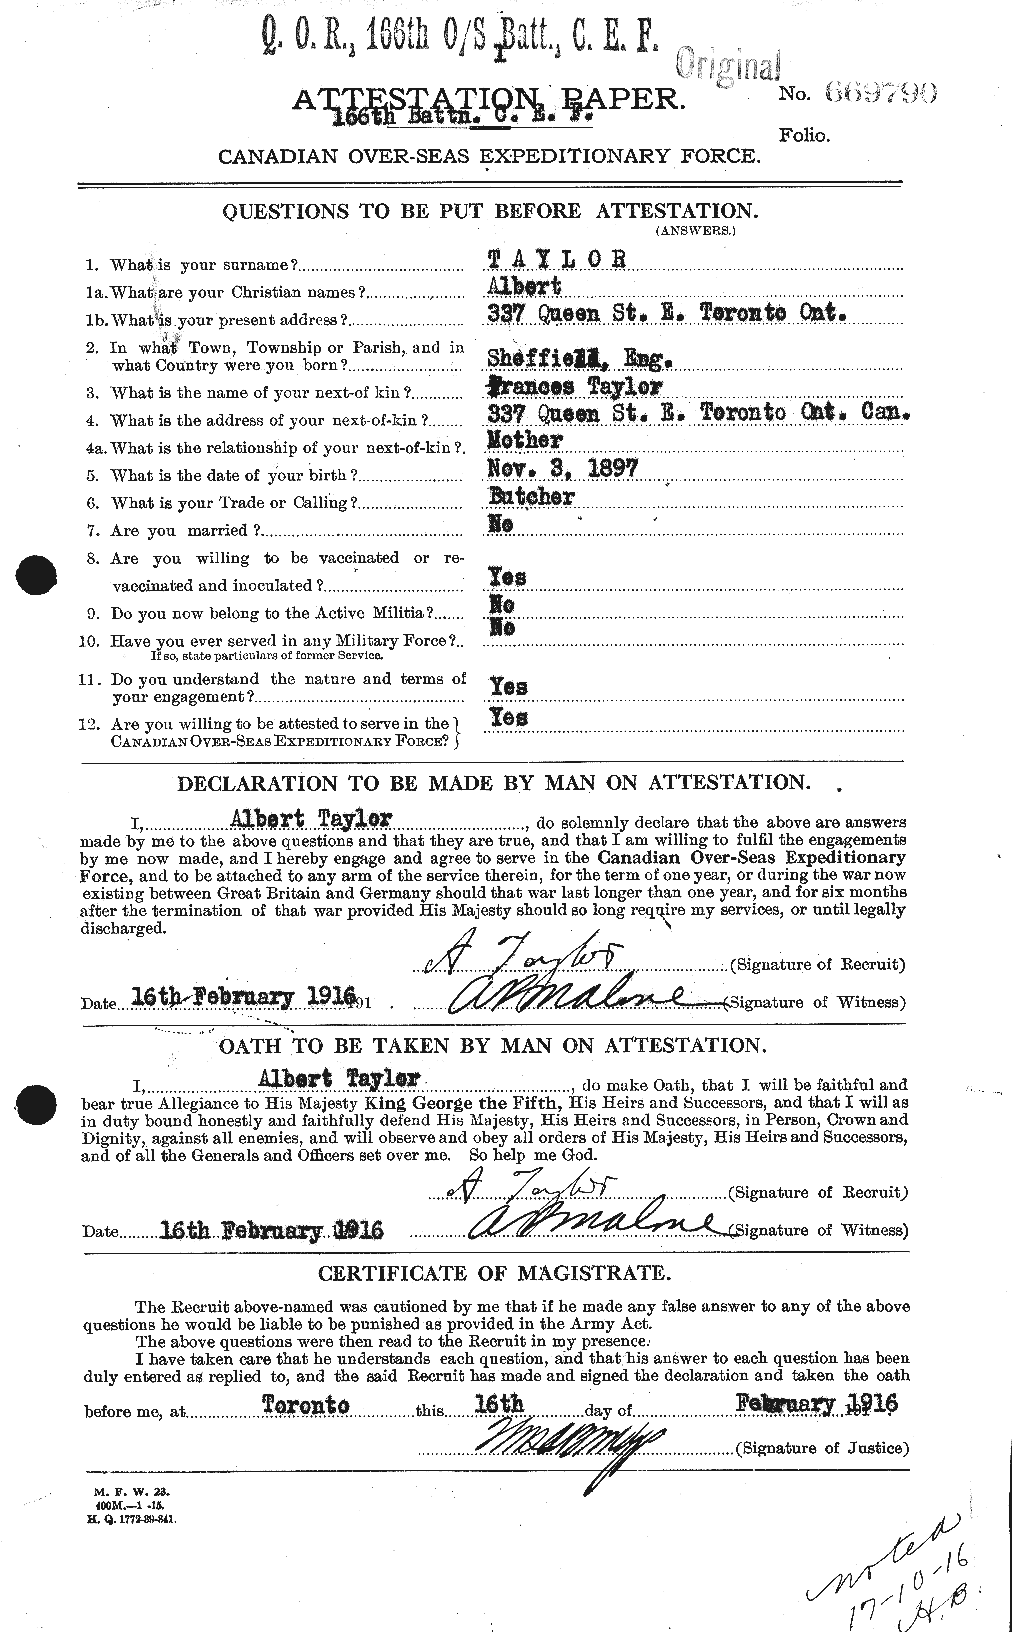 Personnel Records of the First World War - CEF 626083a